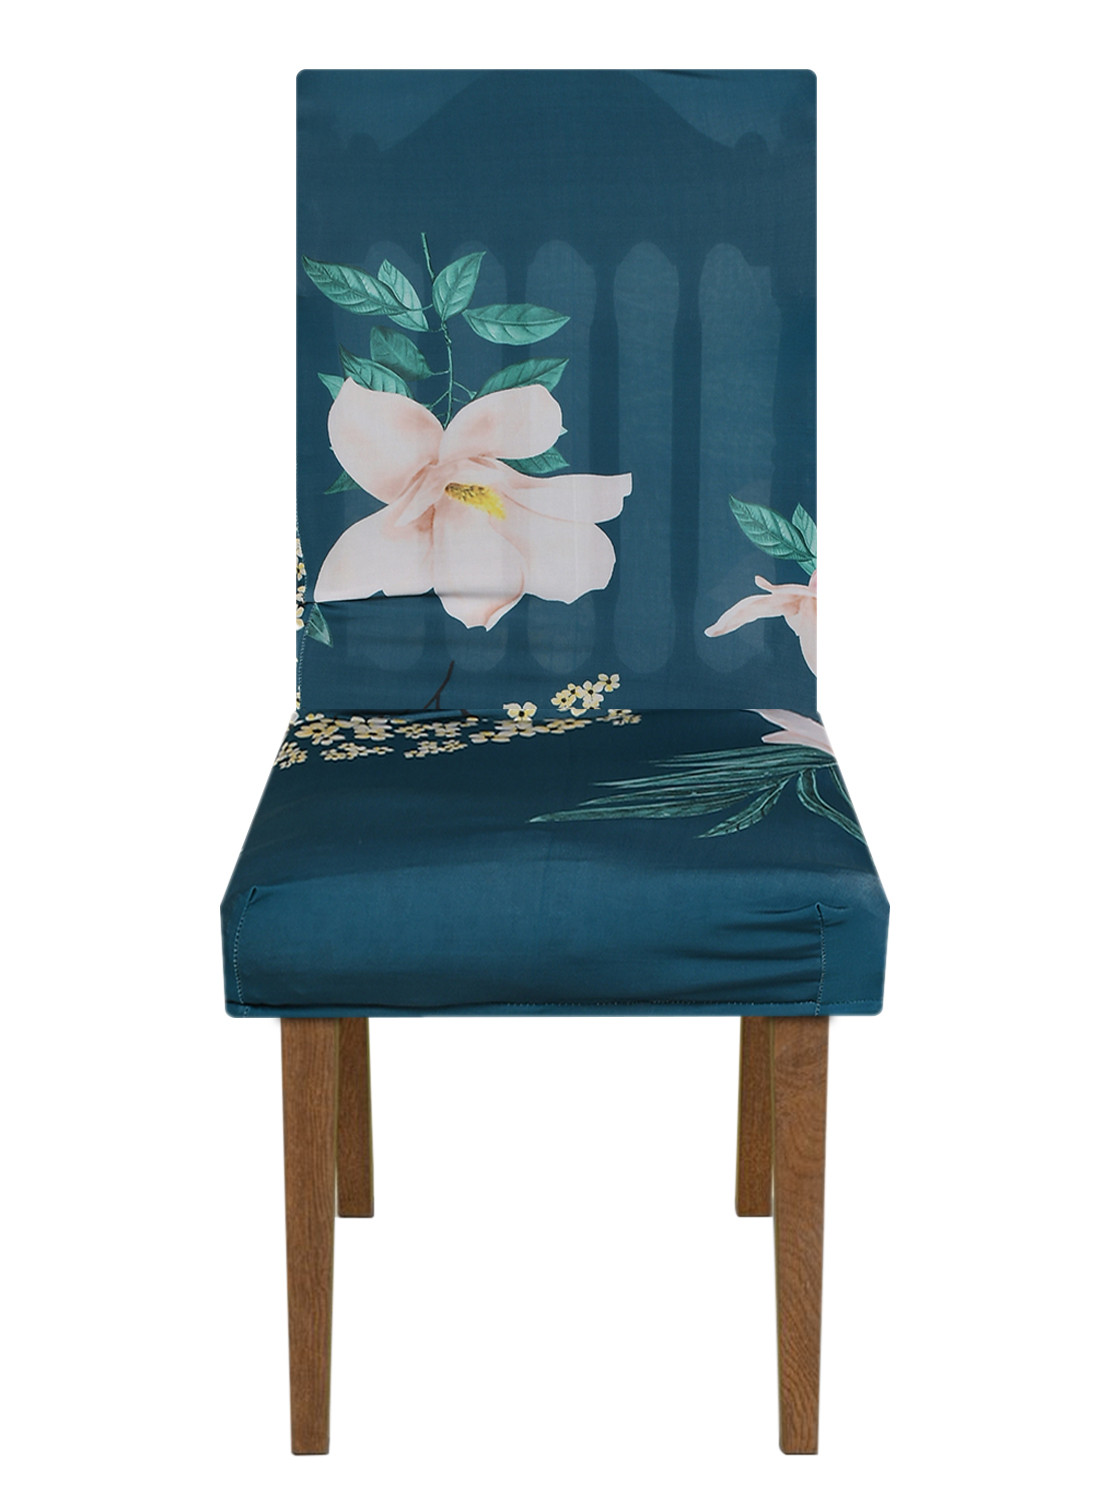 Kuber Industries Floral Print Elastic Stretchable Polyester Chair Cover For Home, Office, Hotels, Wedding Banquet (Green) 54KM4327